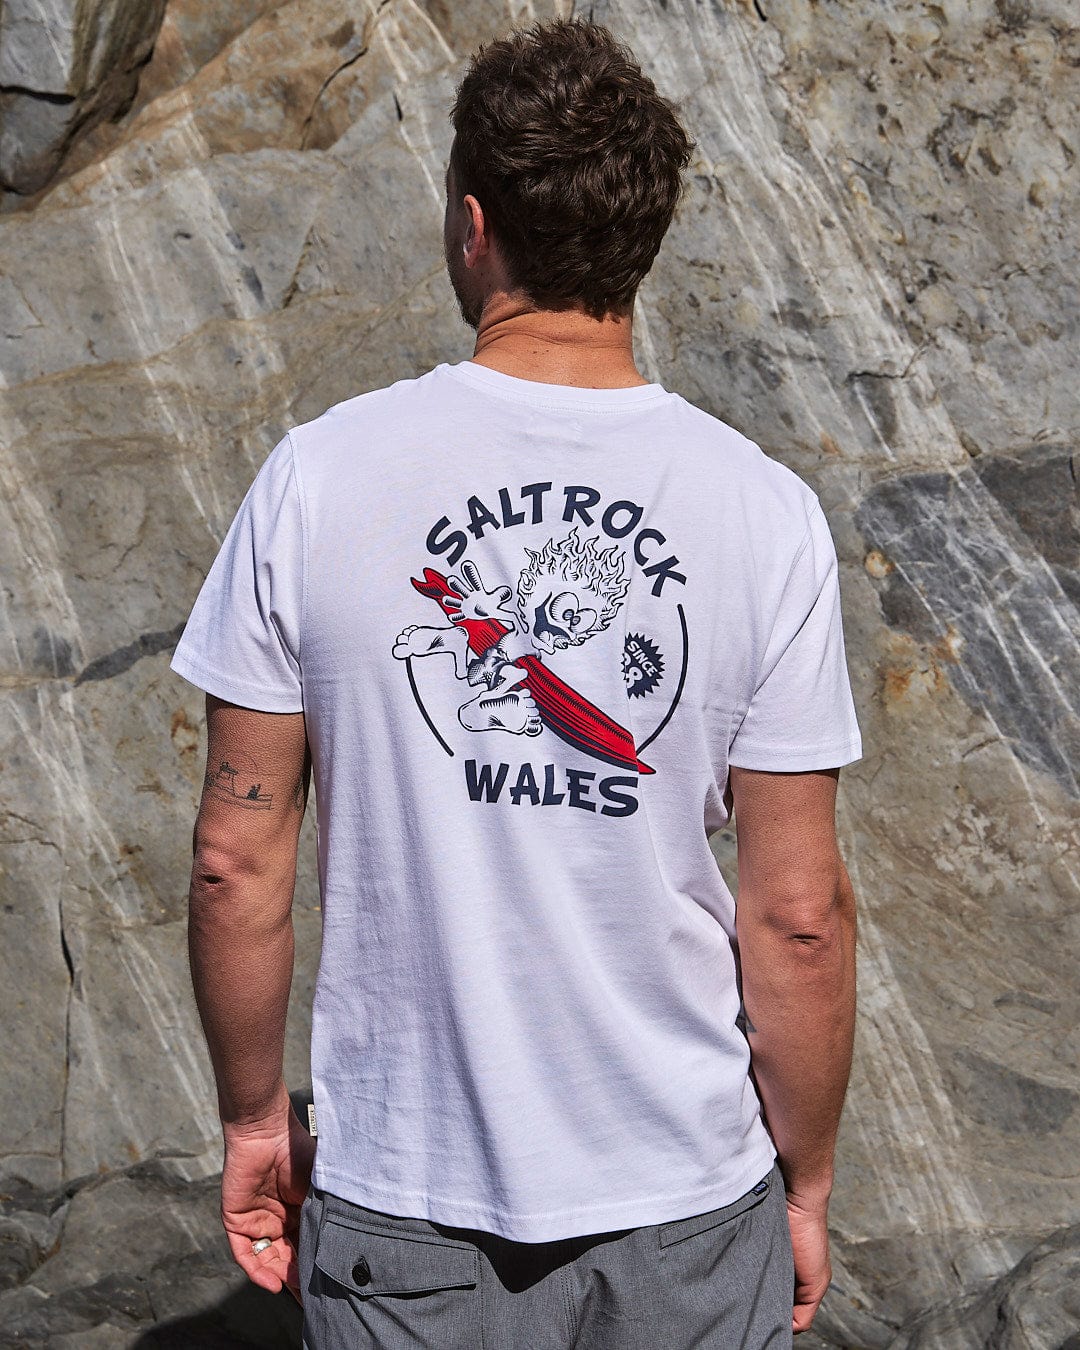 A man wearing a Wave Rider Wales - Mens Short Sleeve T-Shirt - White by Saltrock.